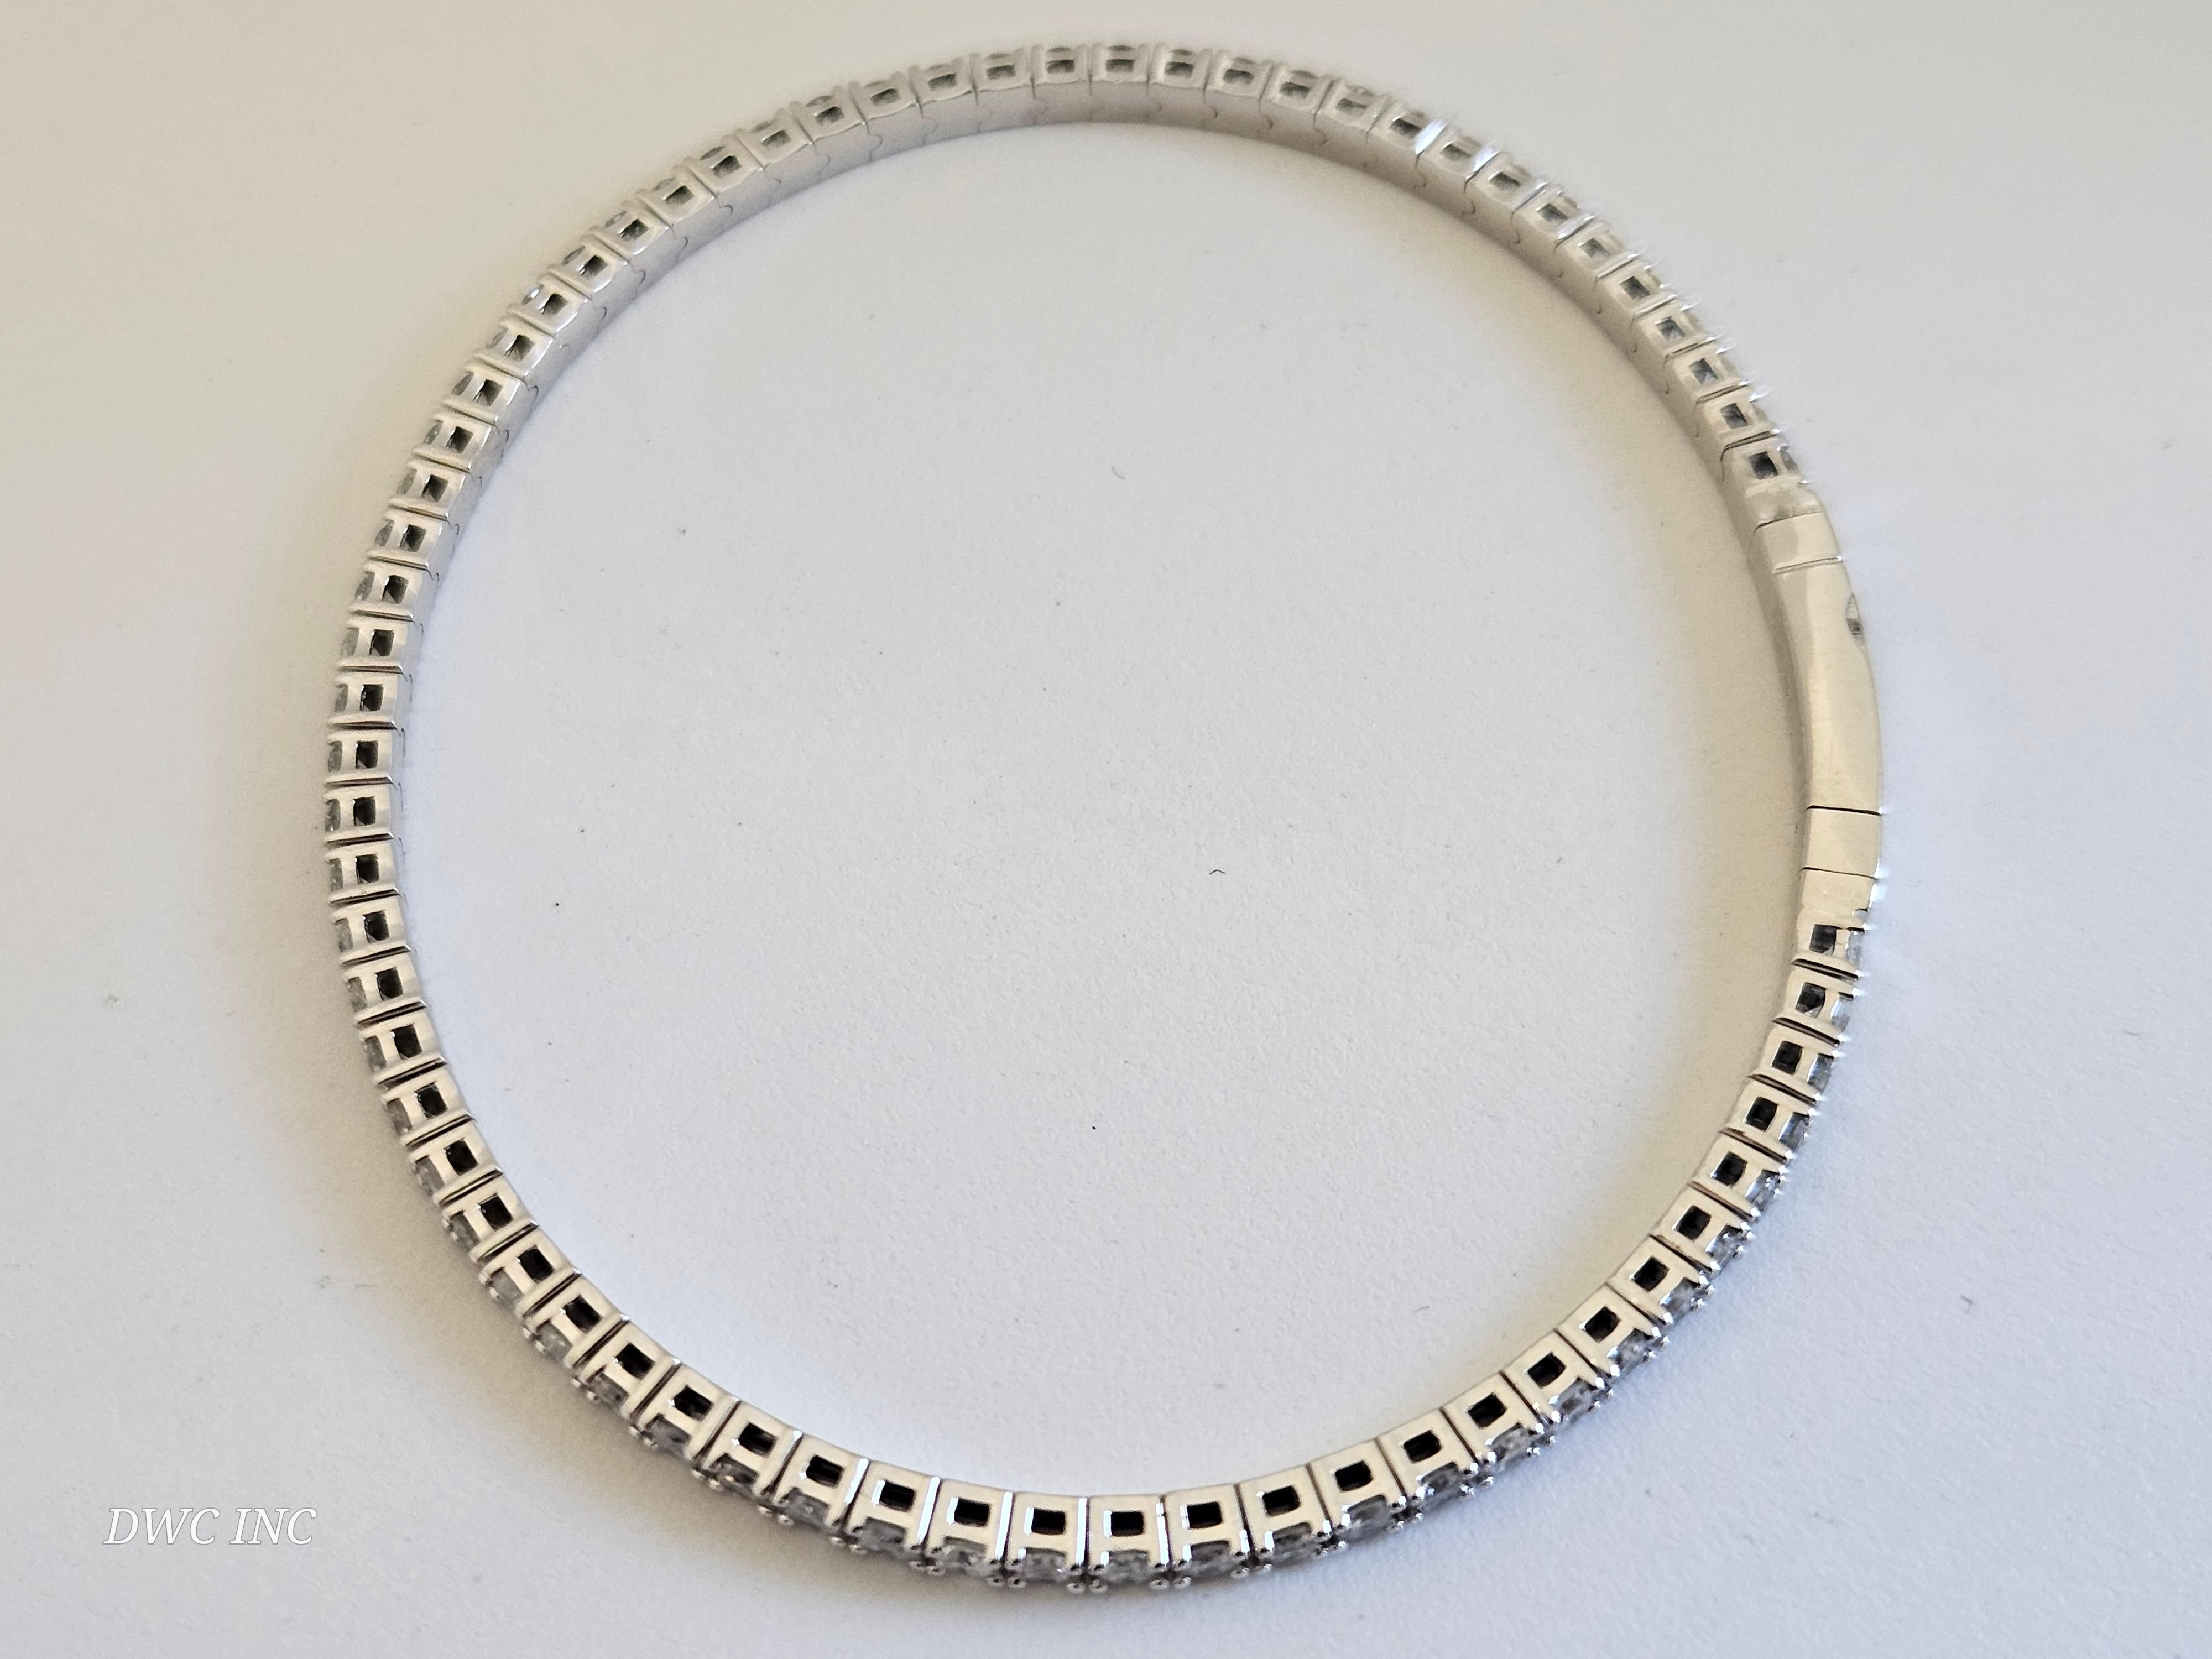 2.27 Carat Round Brilliant Cut Diamond Bangle Bracelet 14 Karat White Gold In New Condition For Sale In Great Neck, NY